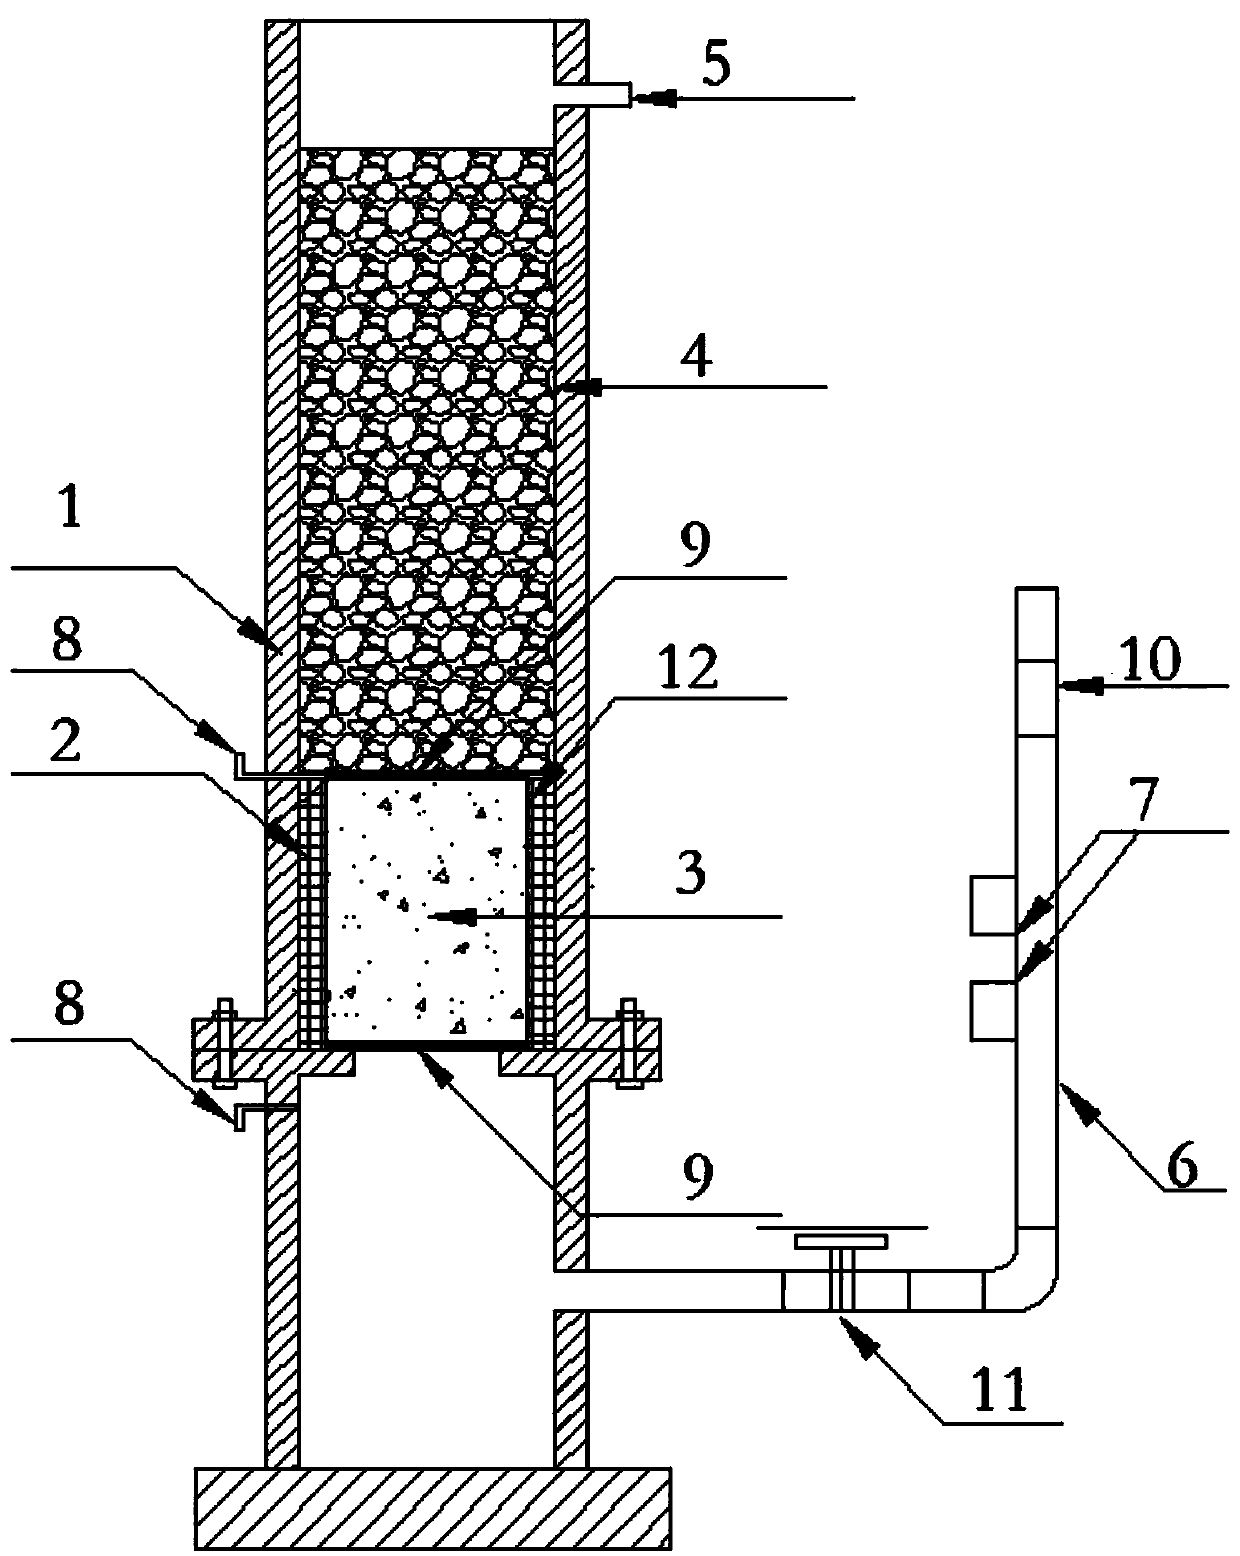 Blocking test device and method for water-permeable concrete pile in piping soil foundation